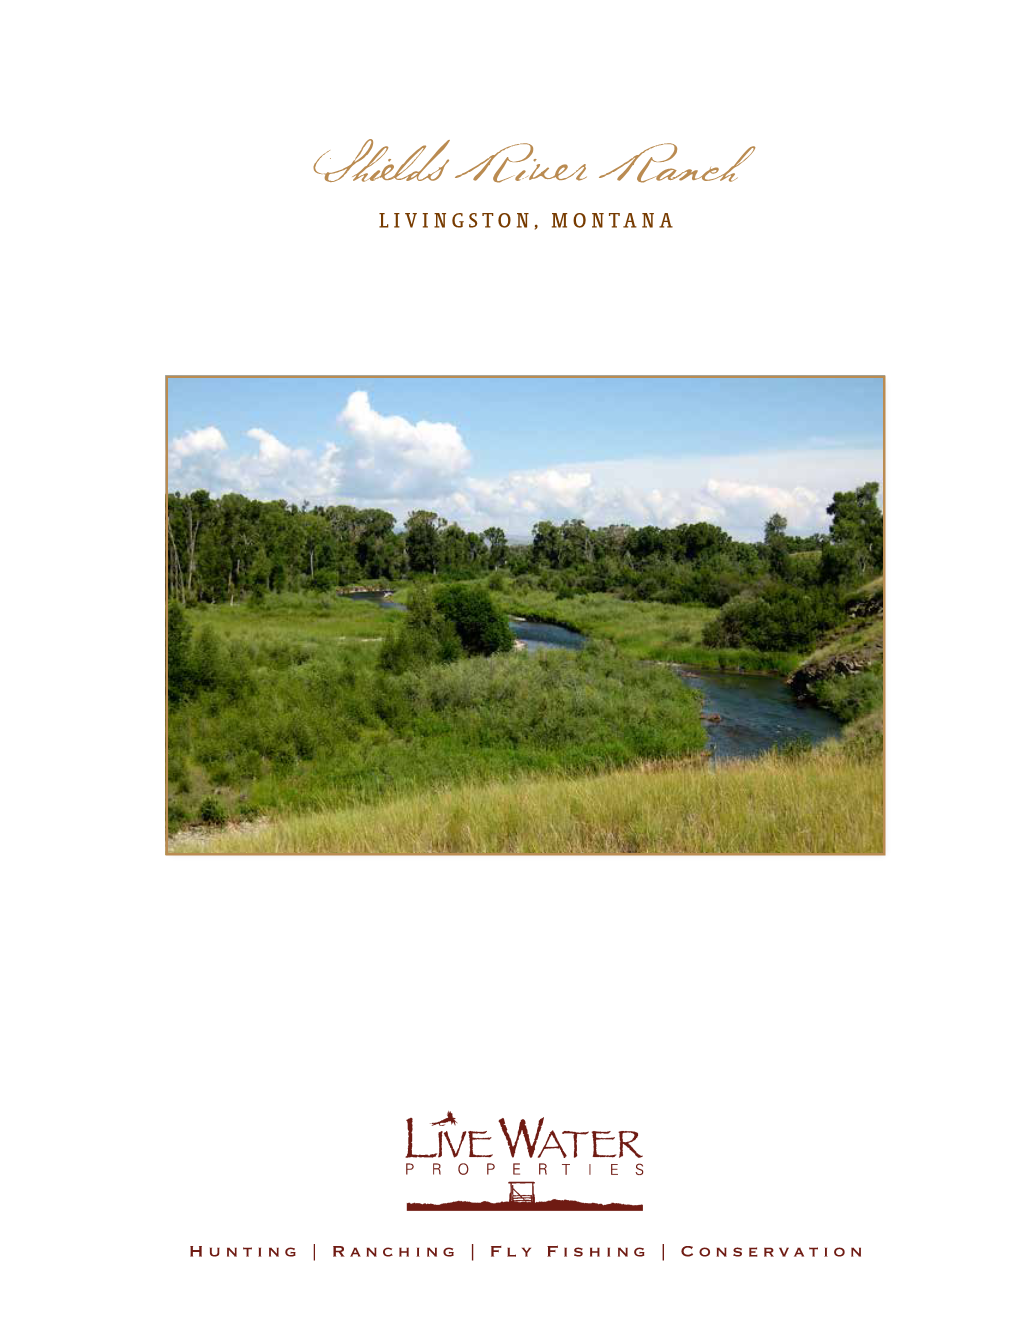 Shields River Ranch Offers 894± Acres of Prime Production and Recreational Property in a Serene Setting